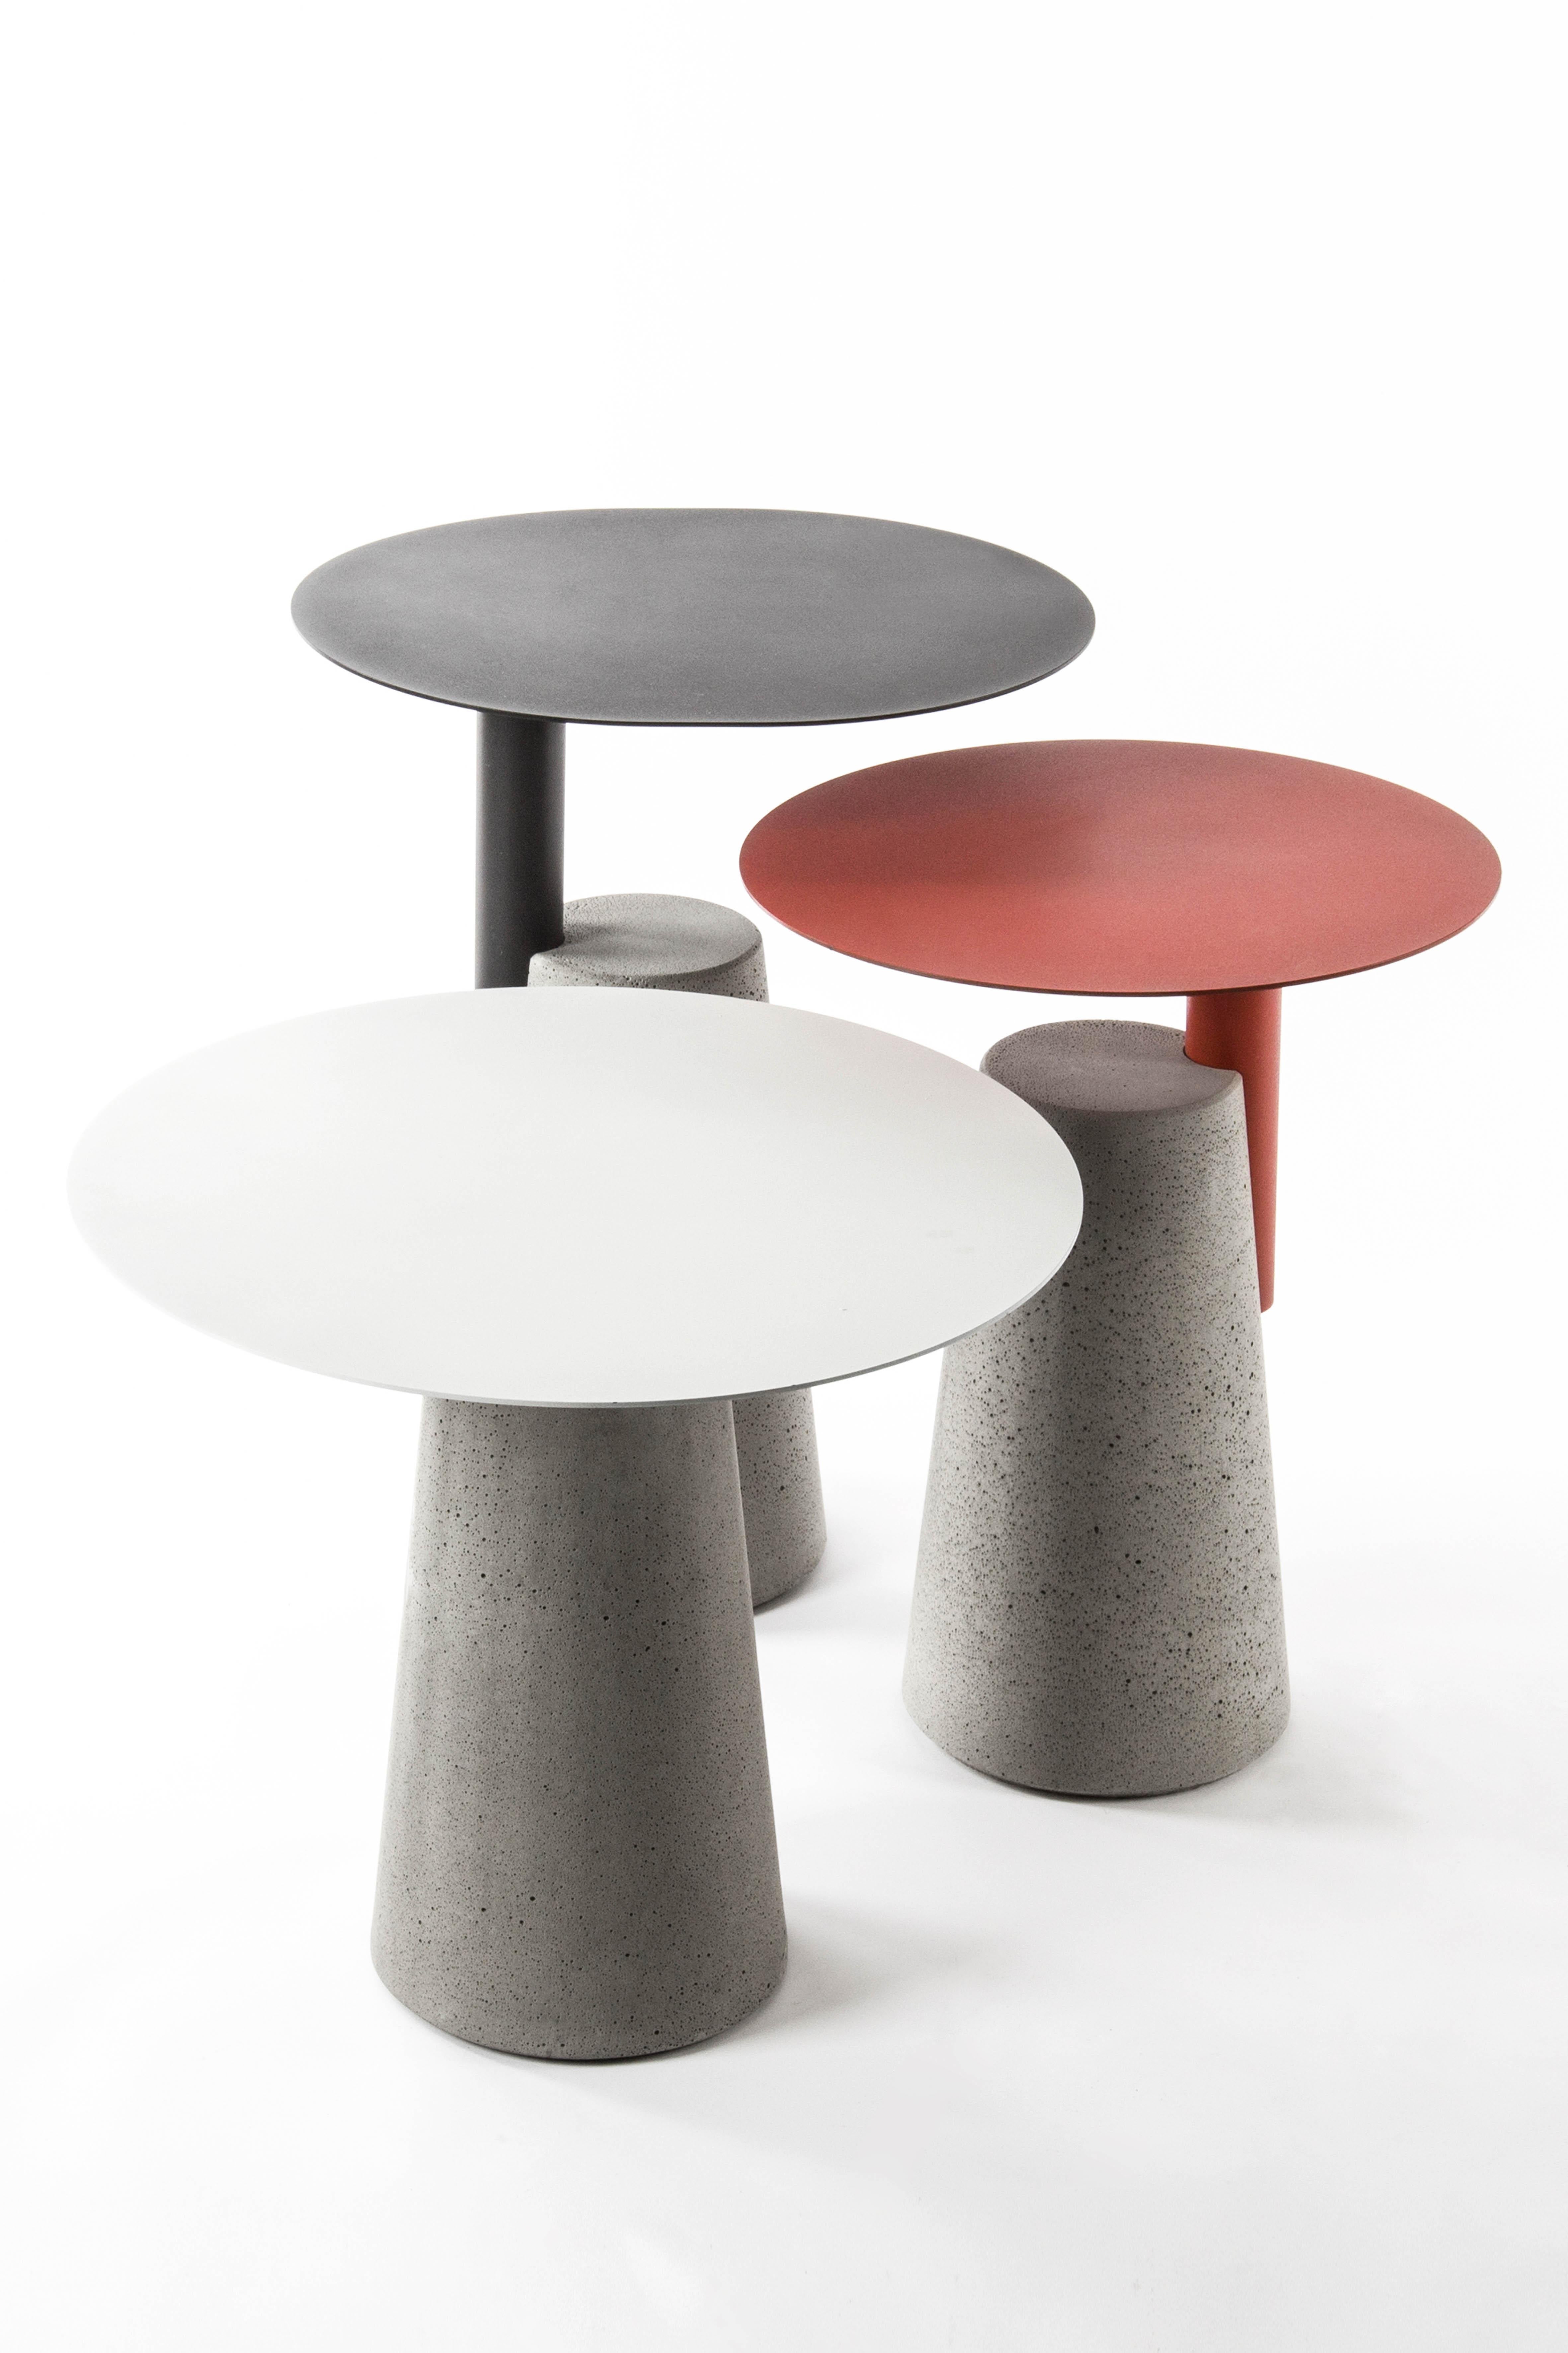 'BAI' is a collection of side table
by Bentu design

Tabletop: Steel
Table base: Concrete

3 sizes available:
- Small H 45 cm, D 50 cm
- Medium H 52 cm, D 40 cm
- Large H 60 cm, D 45 cm

3 colors available: 
Black
White
Red

Bentu